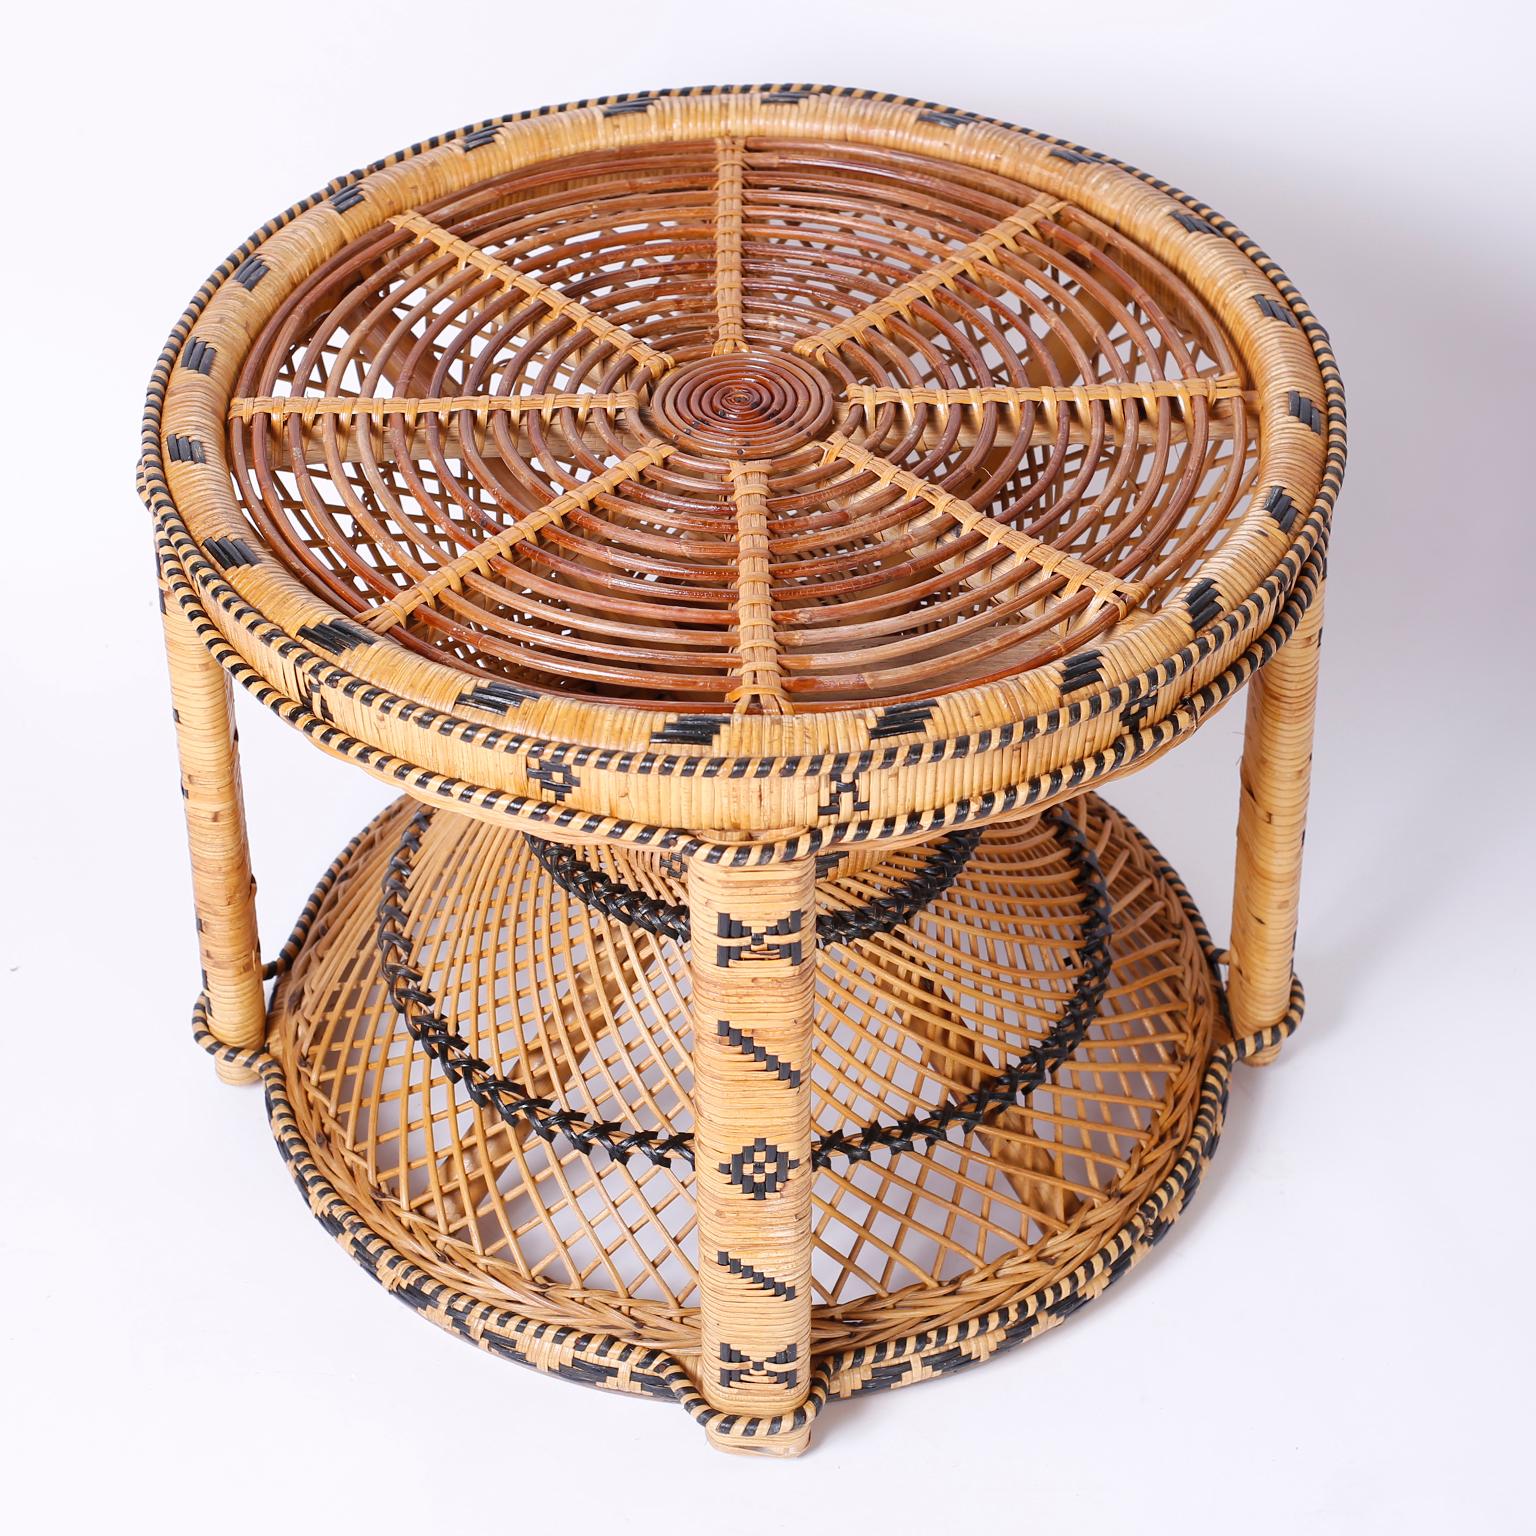 Rattan Pair of Peacock Chairs and Matching Table